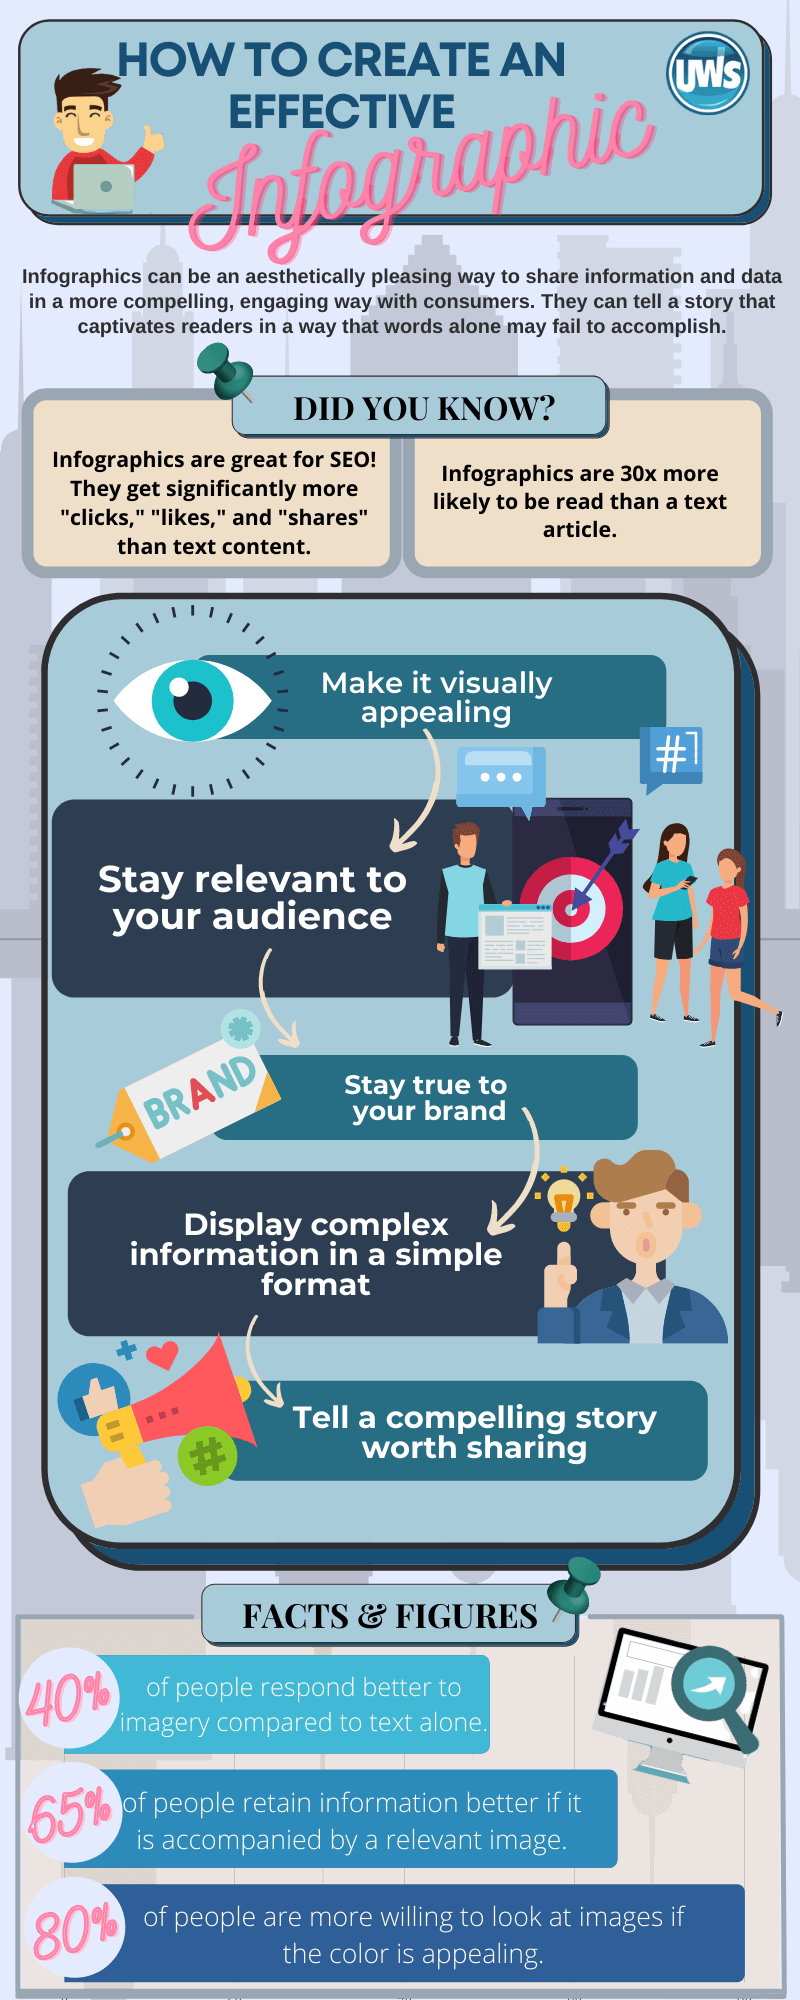 How To Create An Effective Infographic